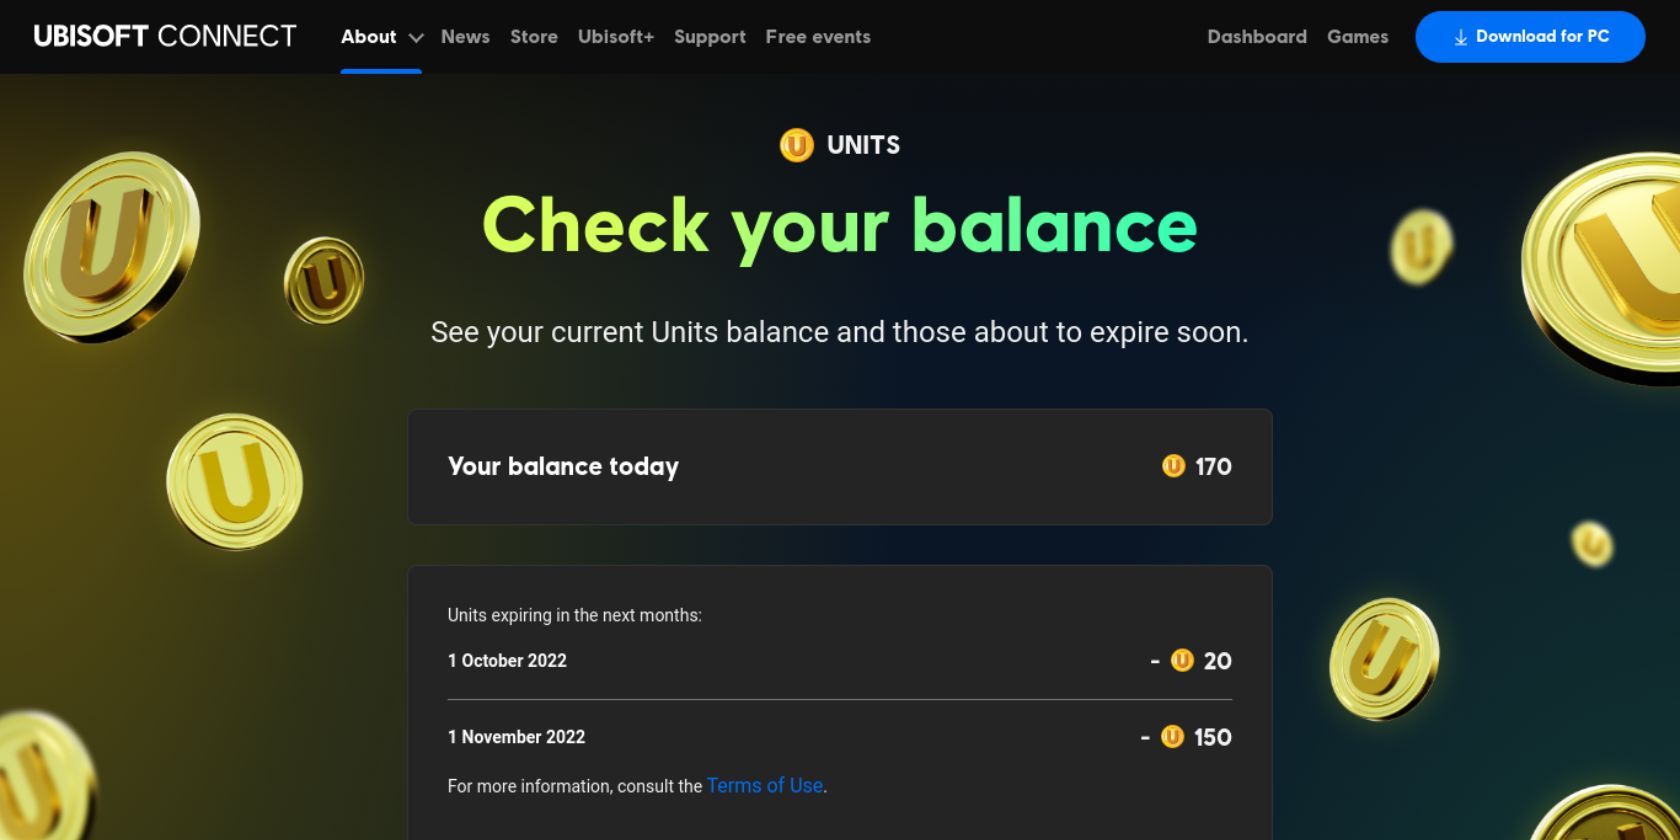 The Ubisoft Connect Points page allowing the user to check their balance